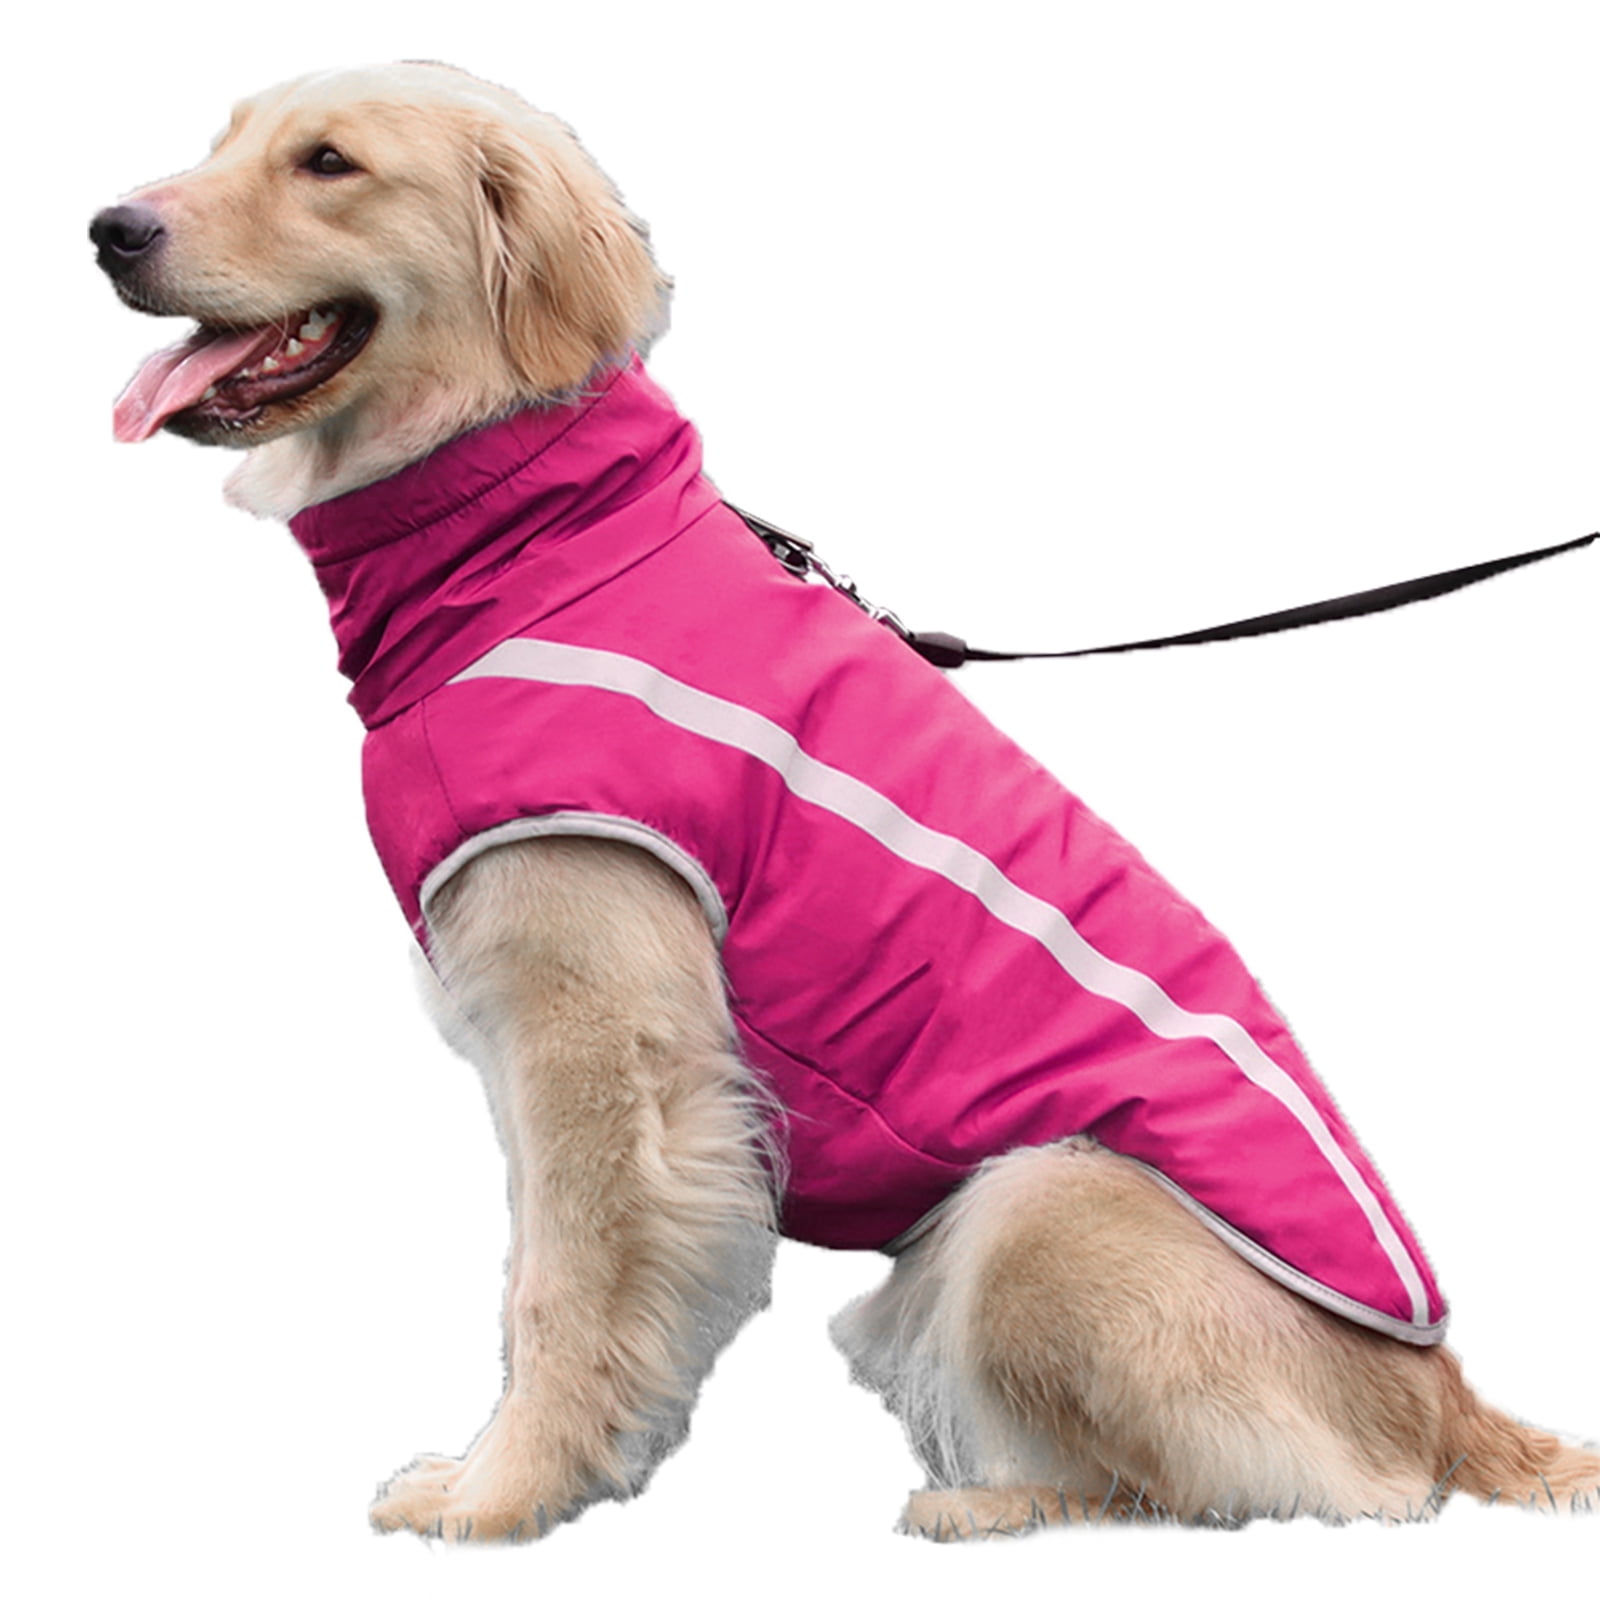 Dog Jacket with Harness Large Dogs Coats Waterproof Dog harness Coats Warm Winter Clothes Windproof Reflective Pet Vest Cotton Padded Cozy Cold Weather Dog Apparels for Medium Large Dogs Gray 6XL